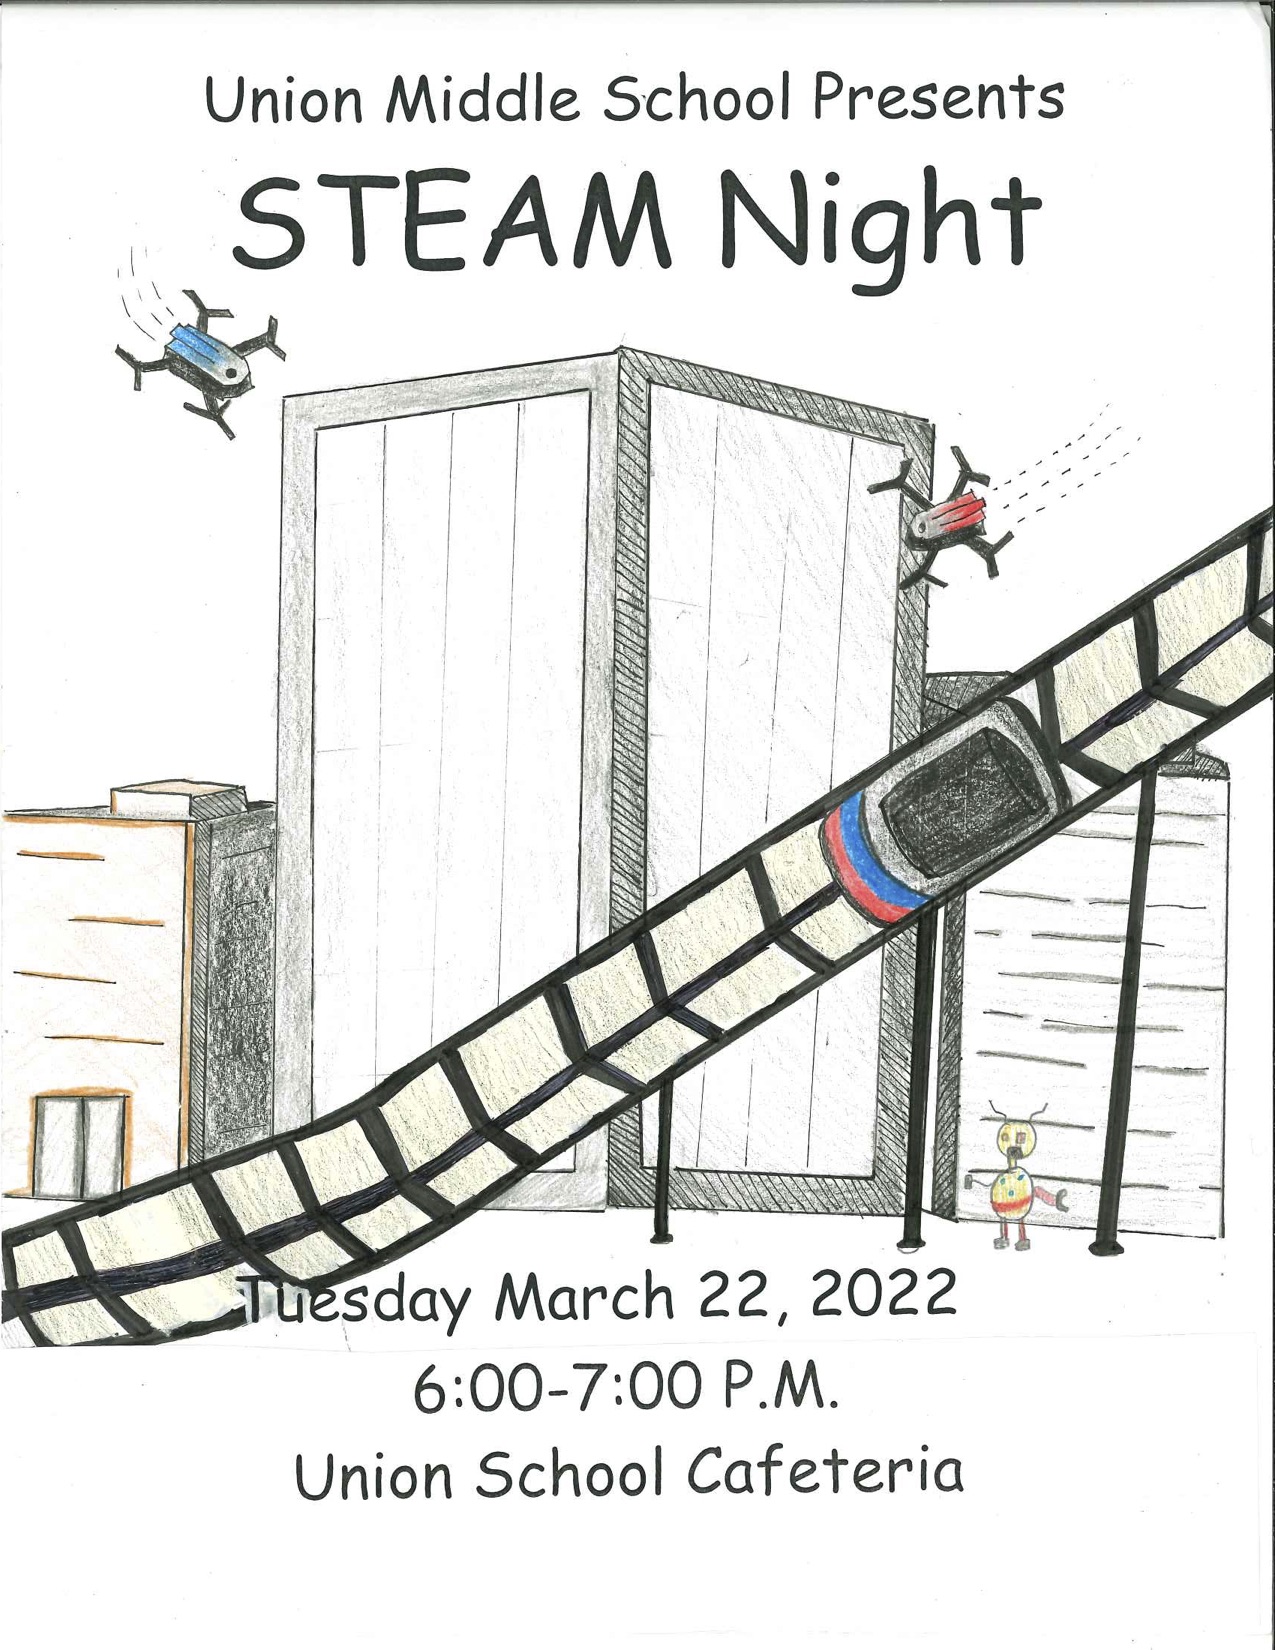 Steam Night  on 3/22/22 from 6:00 to 7:00